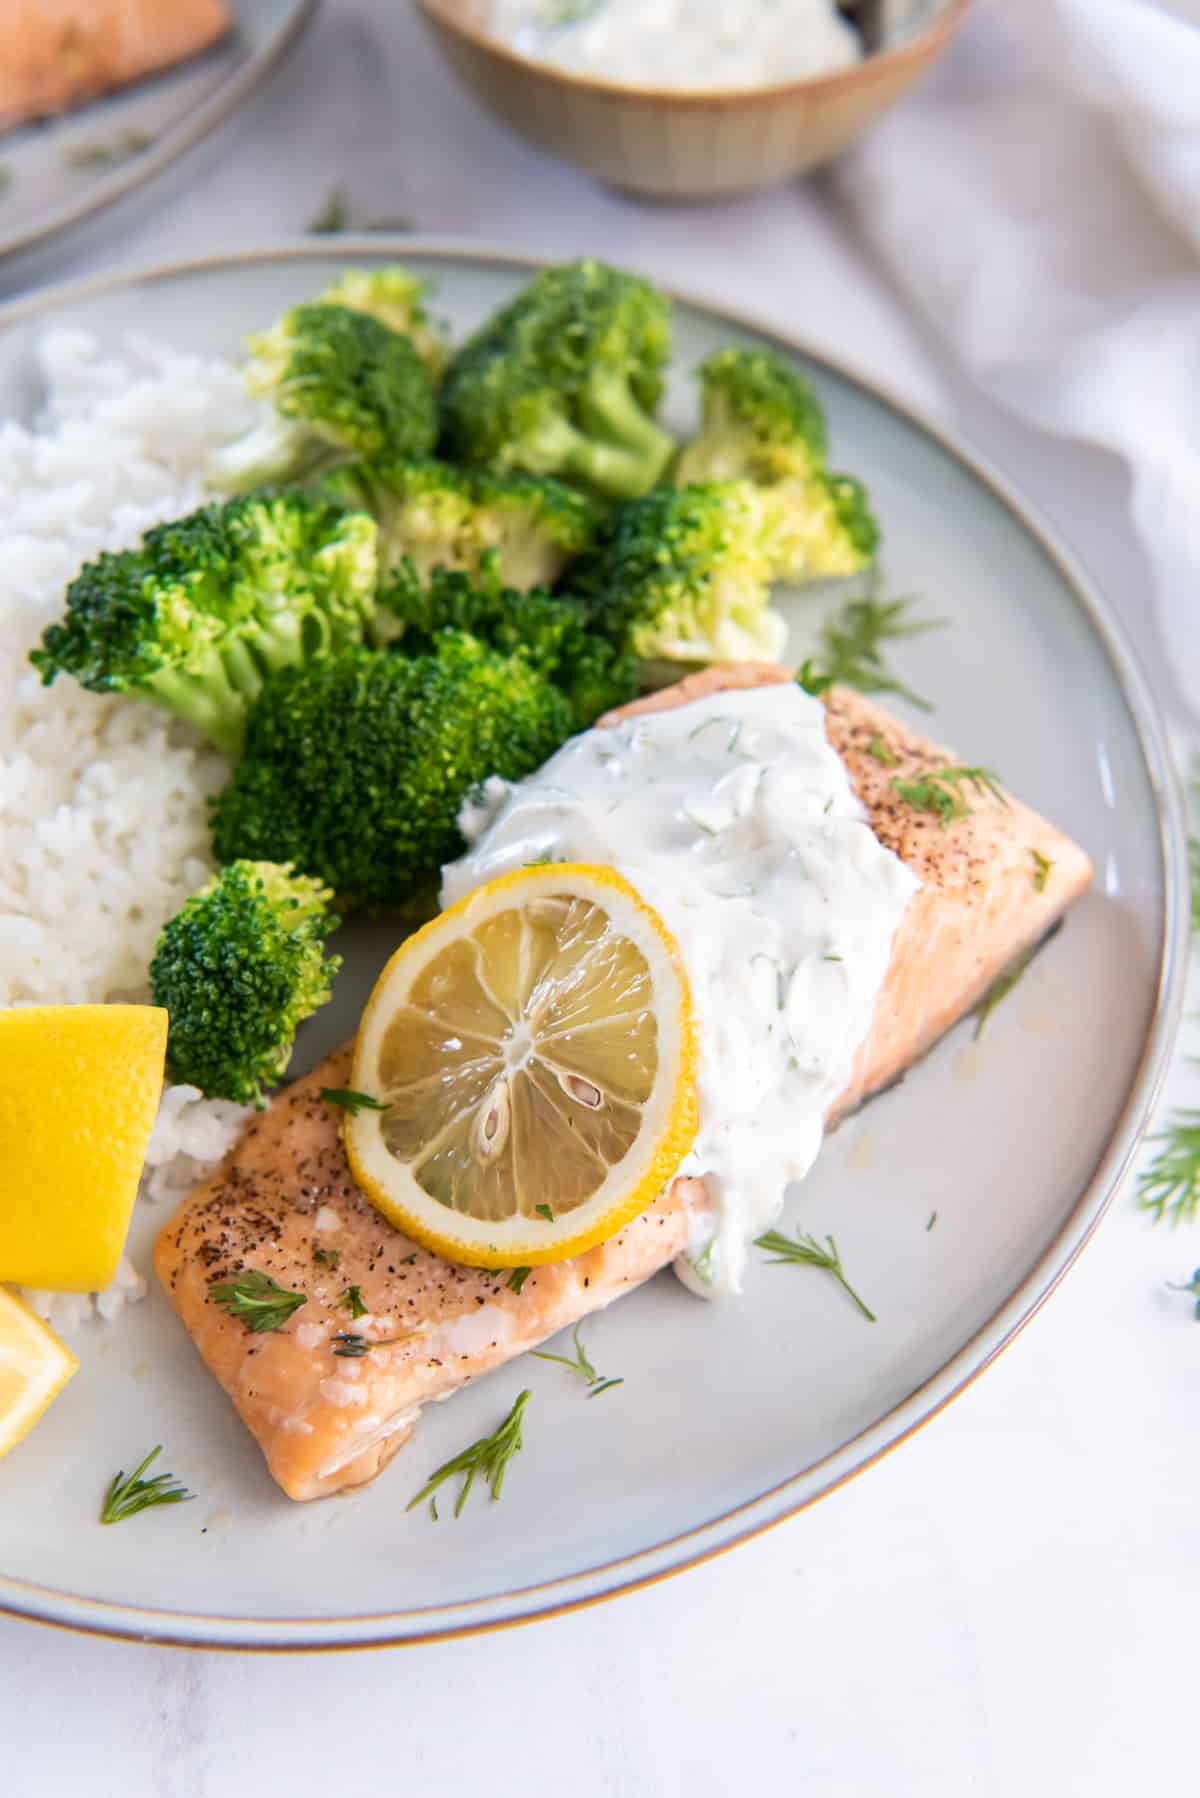 Salmon with dill sauce on a plate with broccoli and rice.